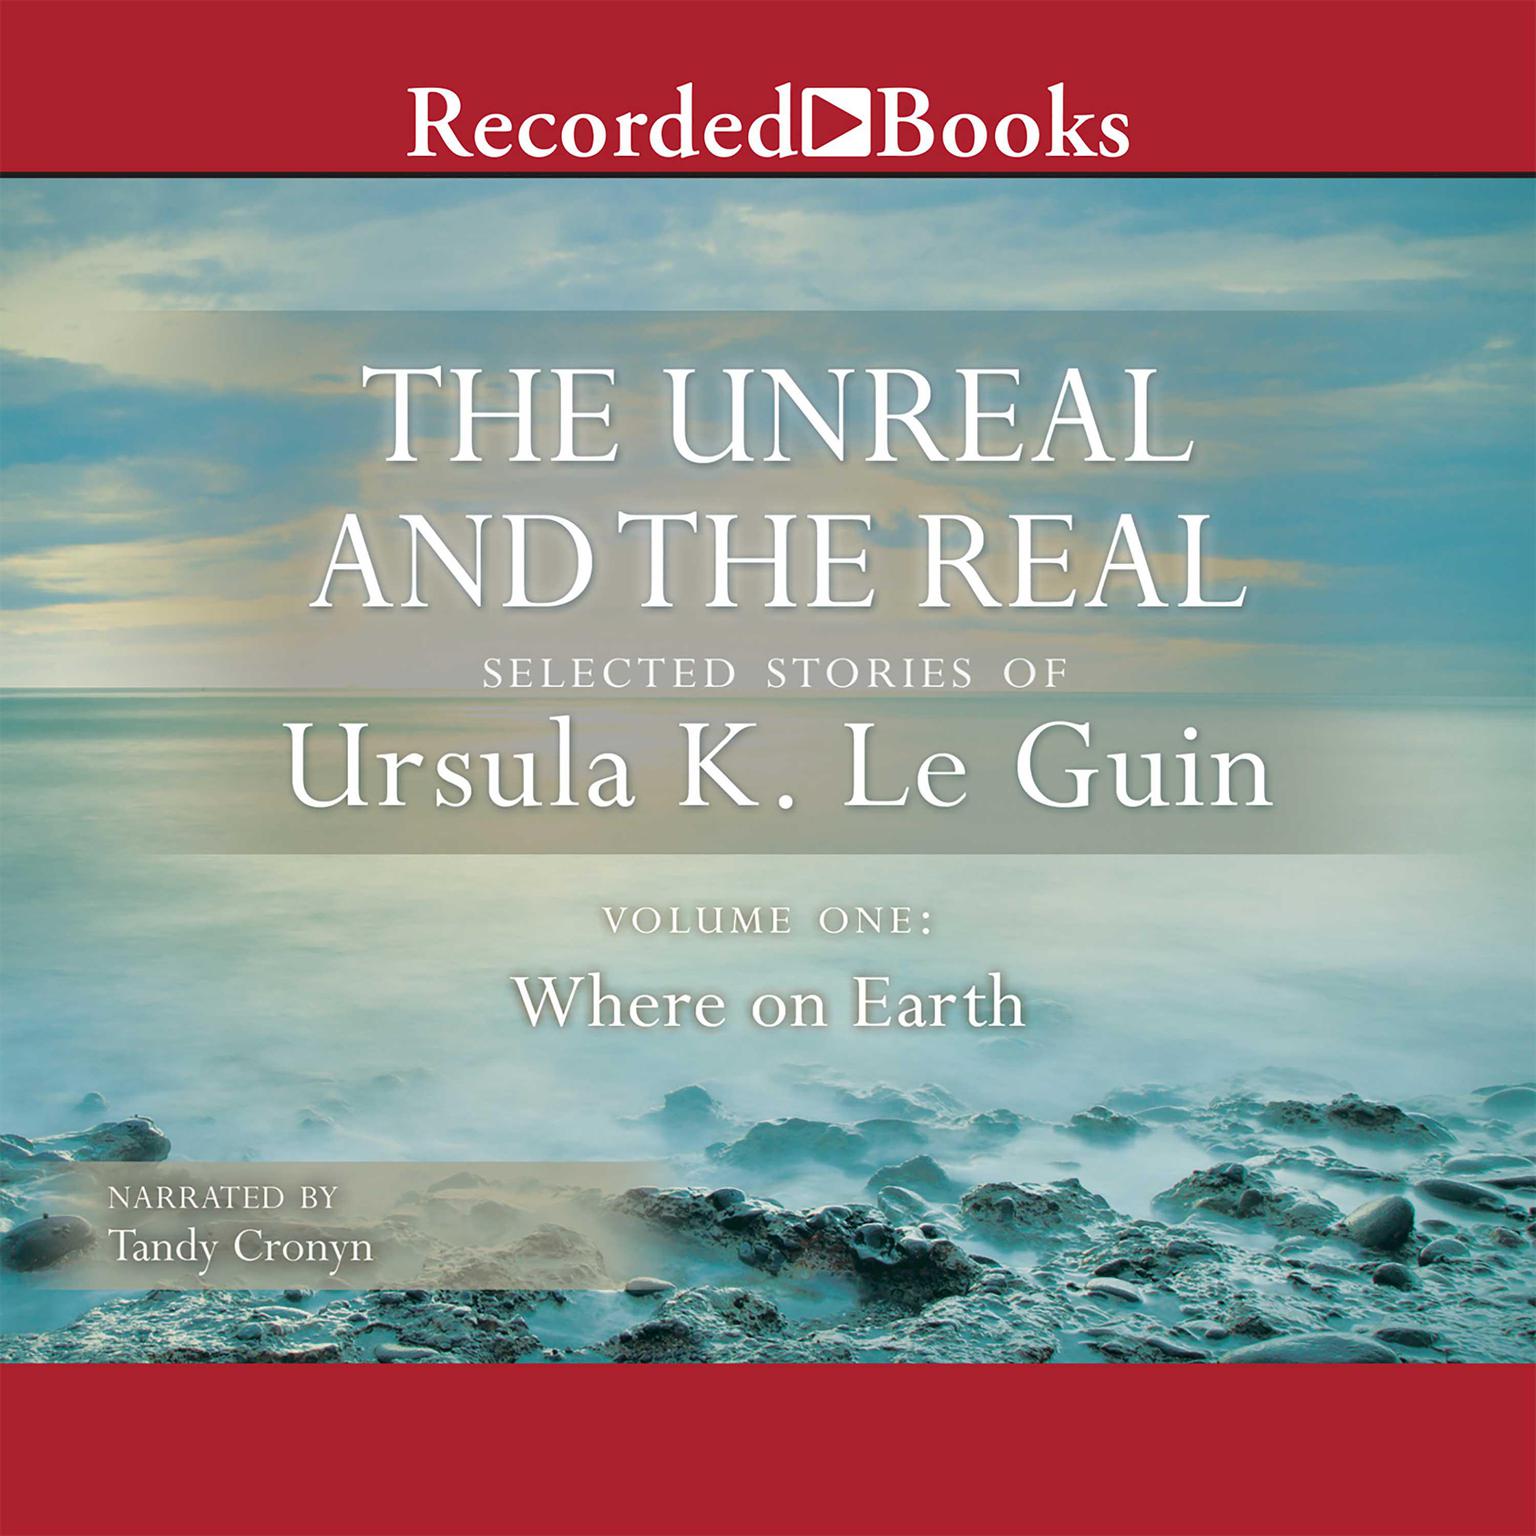 The Unreal and the Real, Vol 1: Selected Stories of Ursula K. Le Guin Volume One: Where on Earth Audiobook, by Ursula K. Le Guin